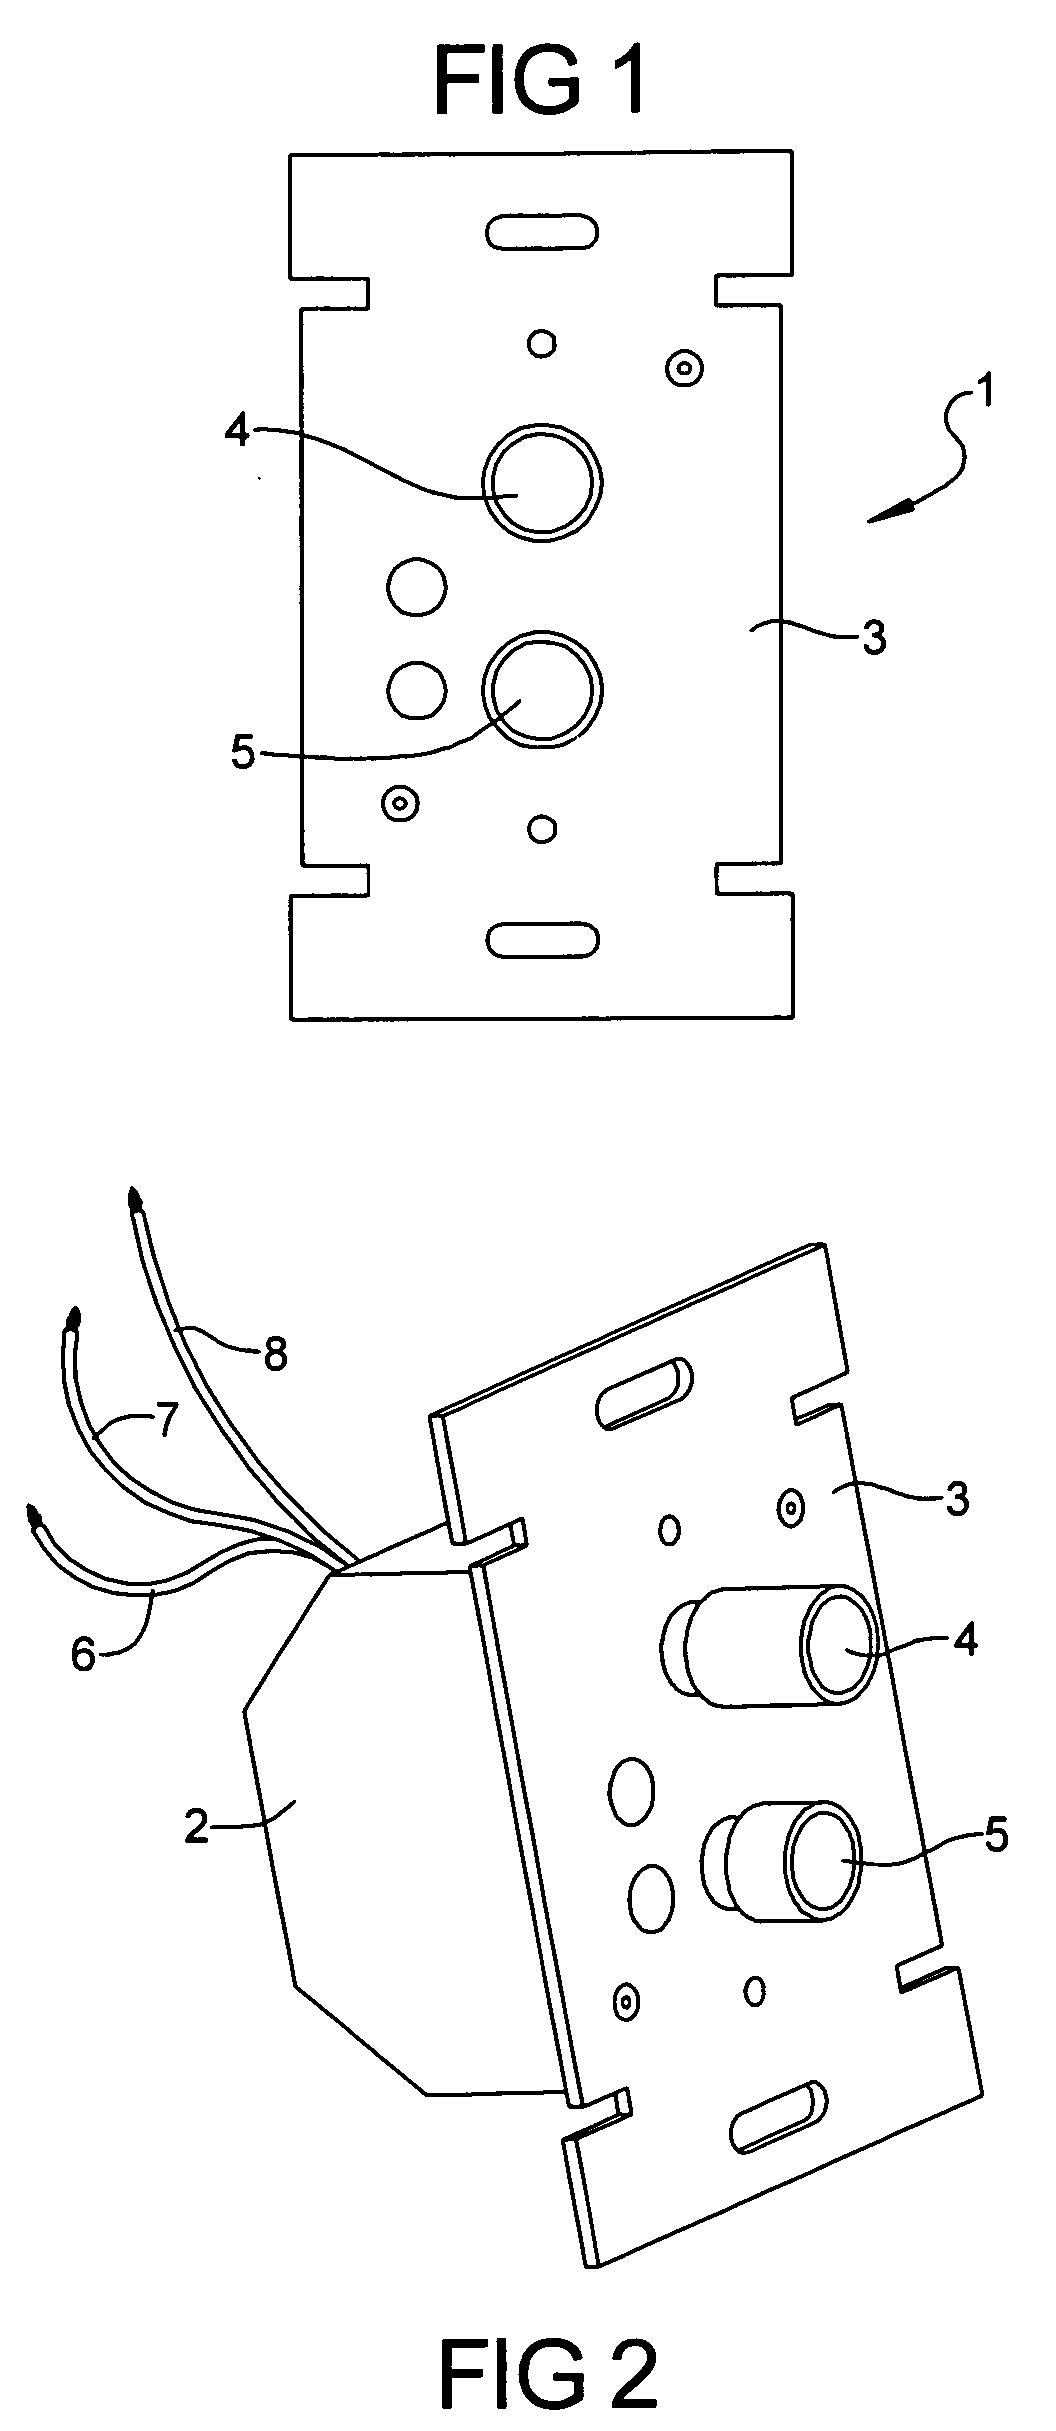 Dimmer switch assembly